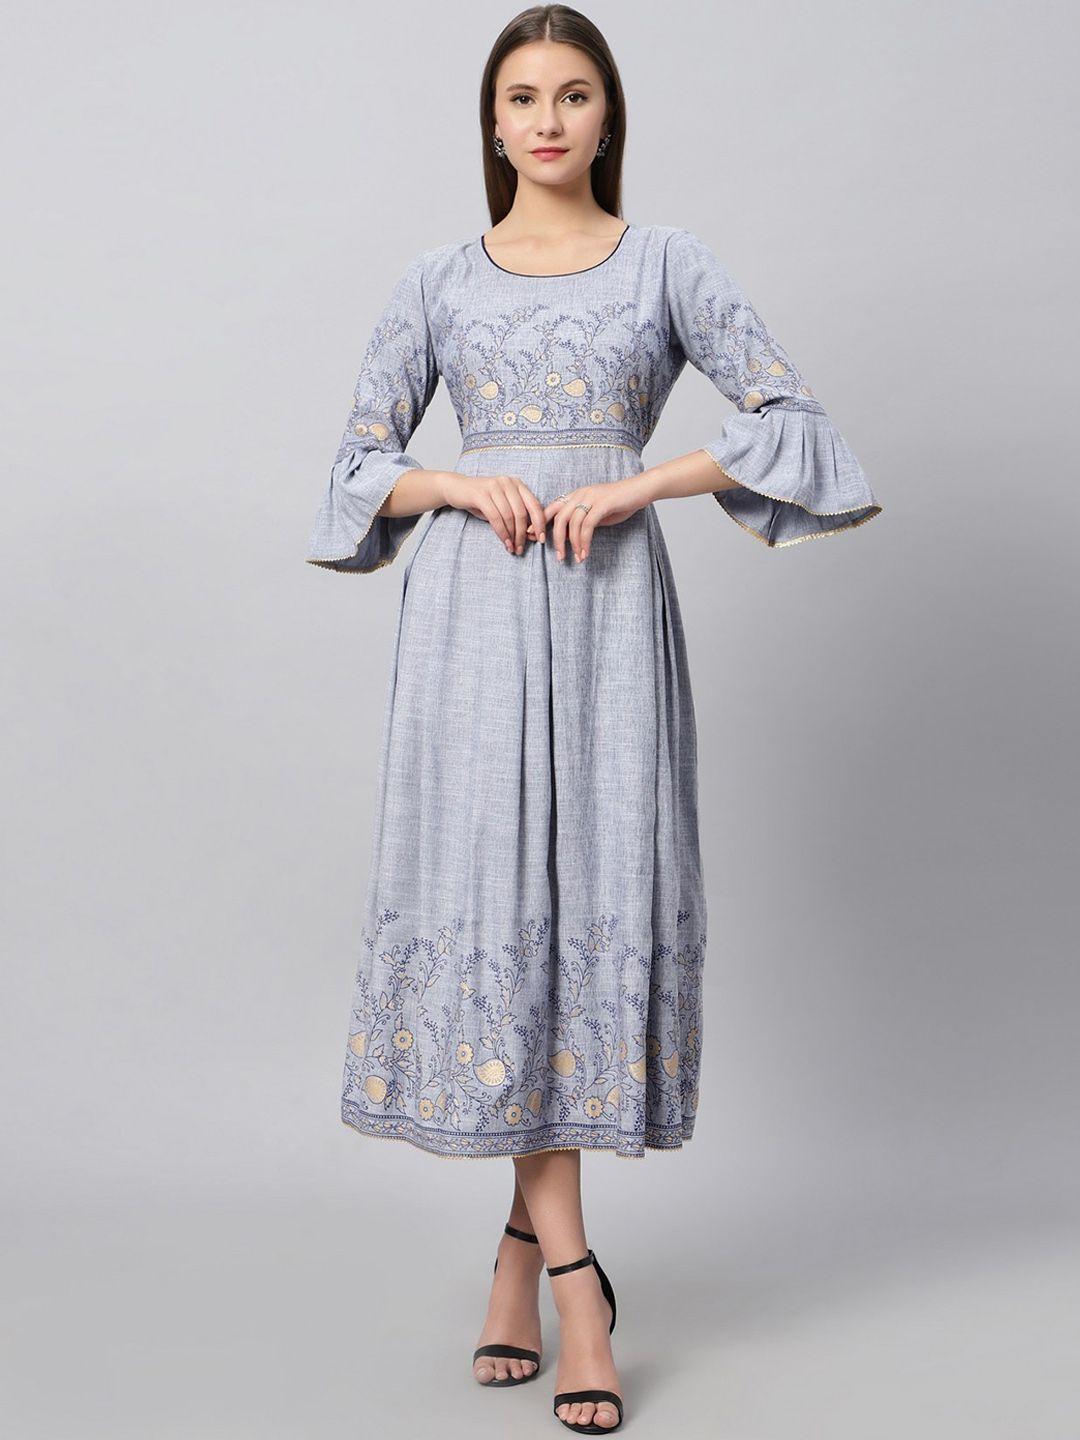 dummy shape ethnic motifs printed bell sleeves fit & flare ethnic dress